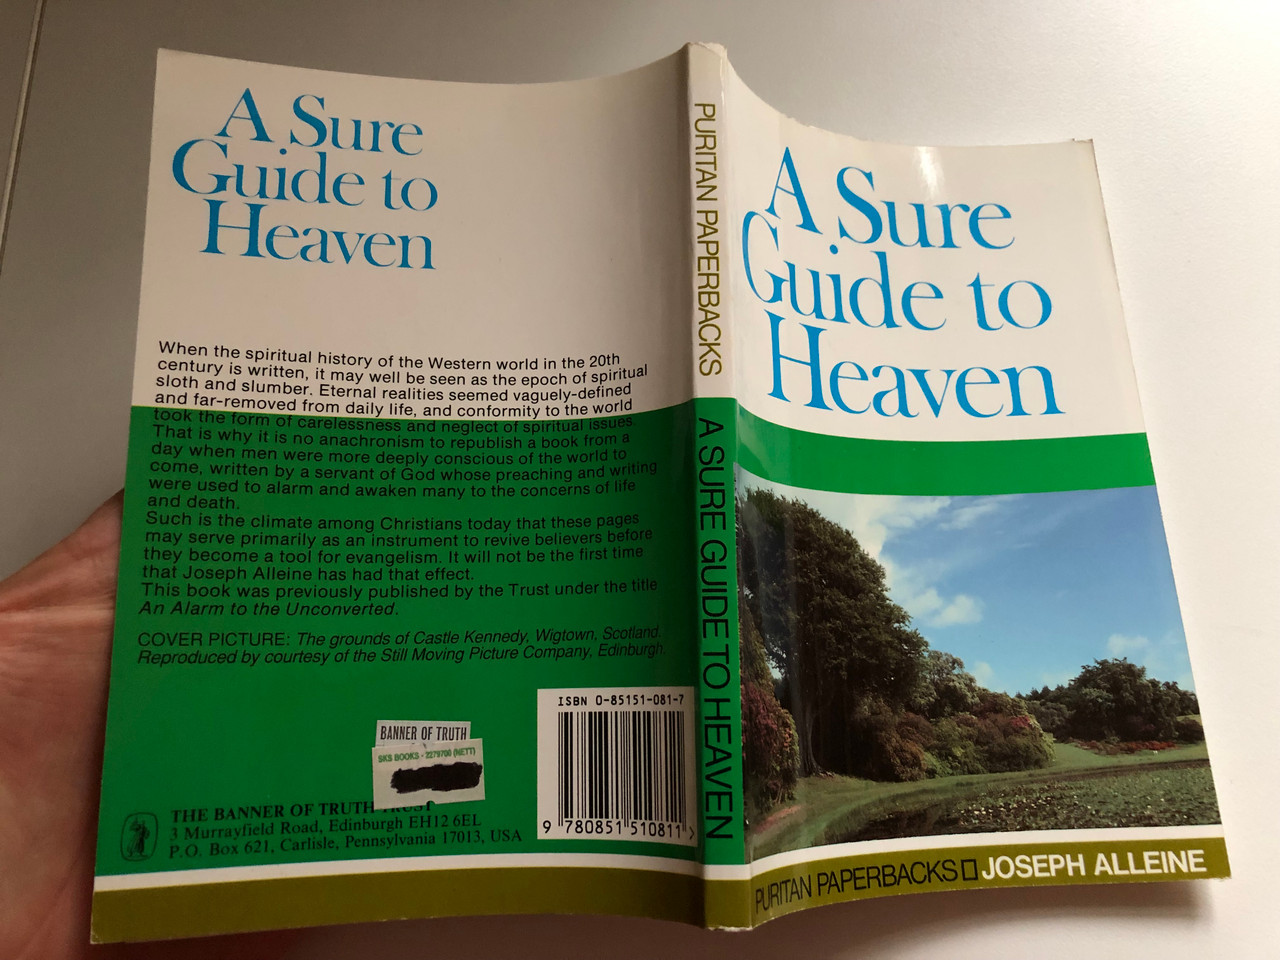 Sure_Guide_to_Heaven_by_Joseph_Alleine_Previously_published_by_the_Trust_under_the_title_An_Alarm_to_the_Unconverted_PURITAN_PAPERBACKS_-_JOSEPH_ALONE_THE_BANNER_OF_TRU___32398.1690601986.1280.1280.JPG (1280×960)